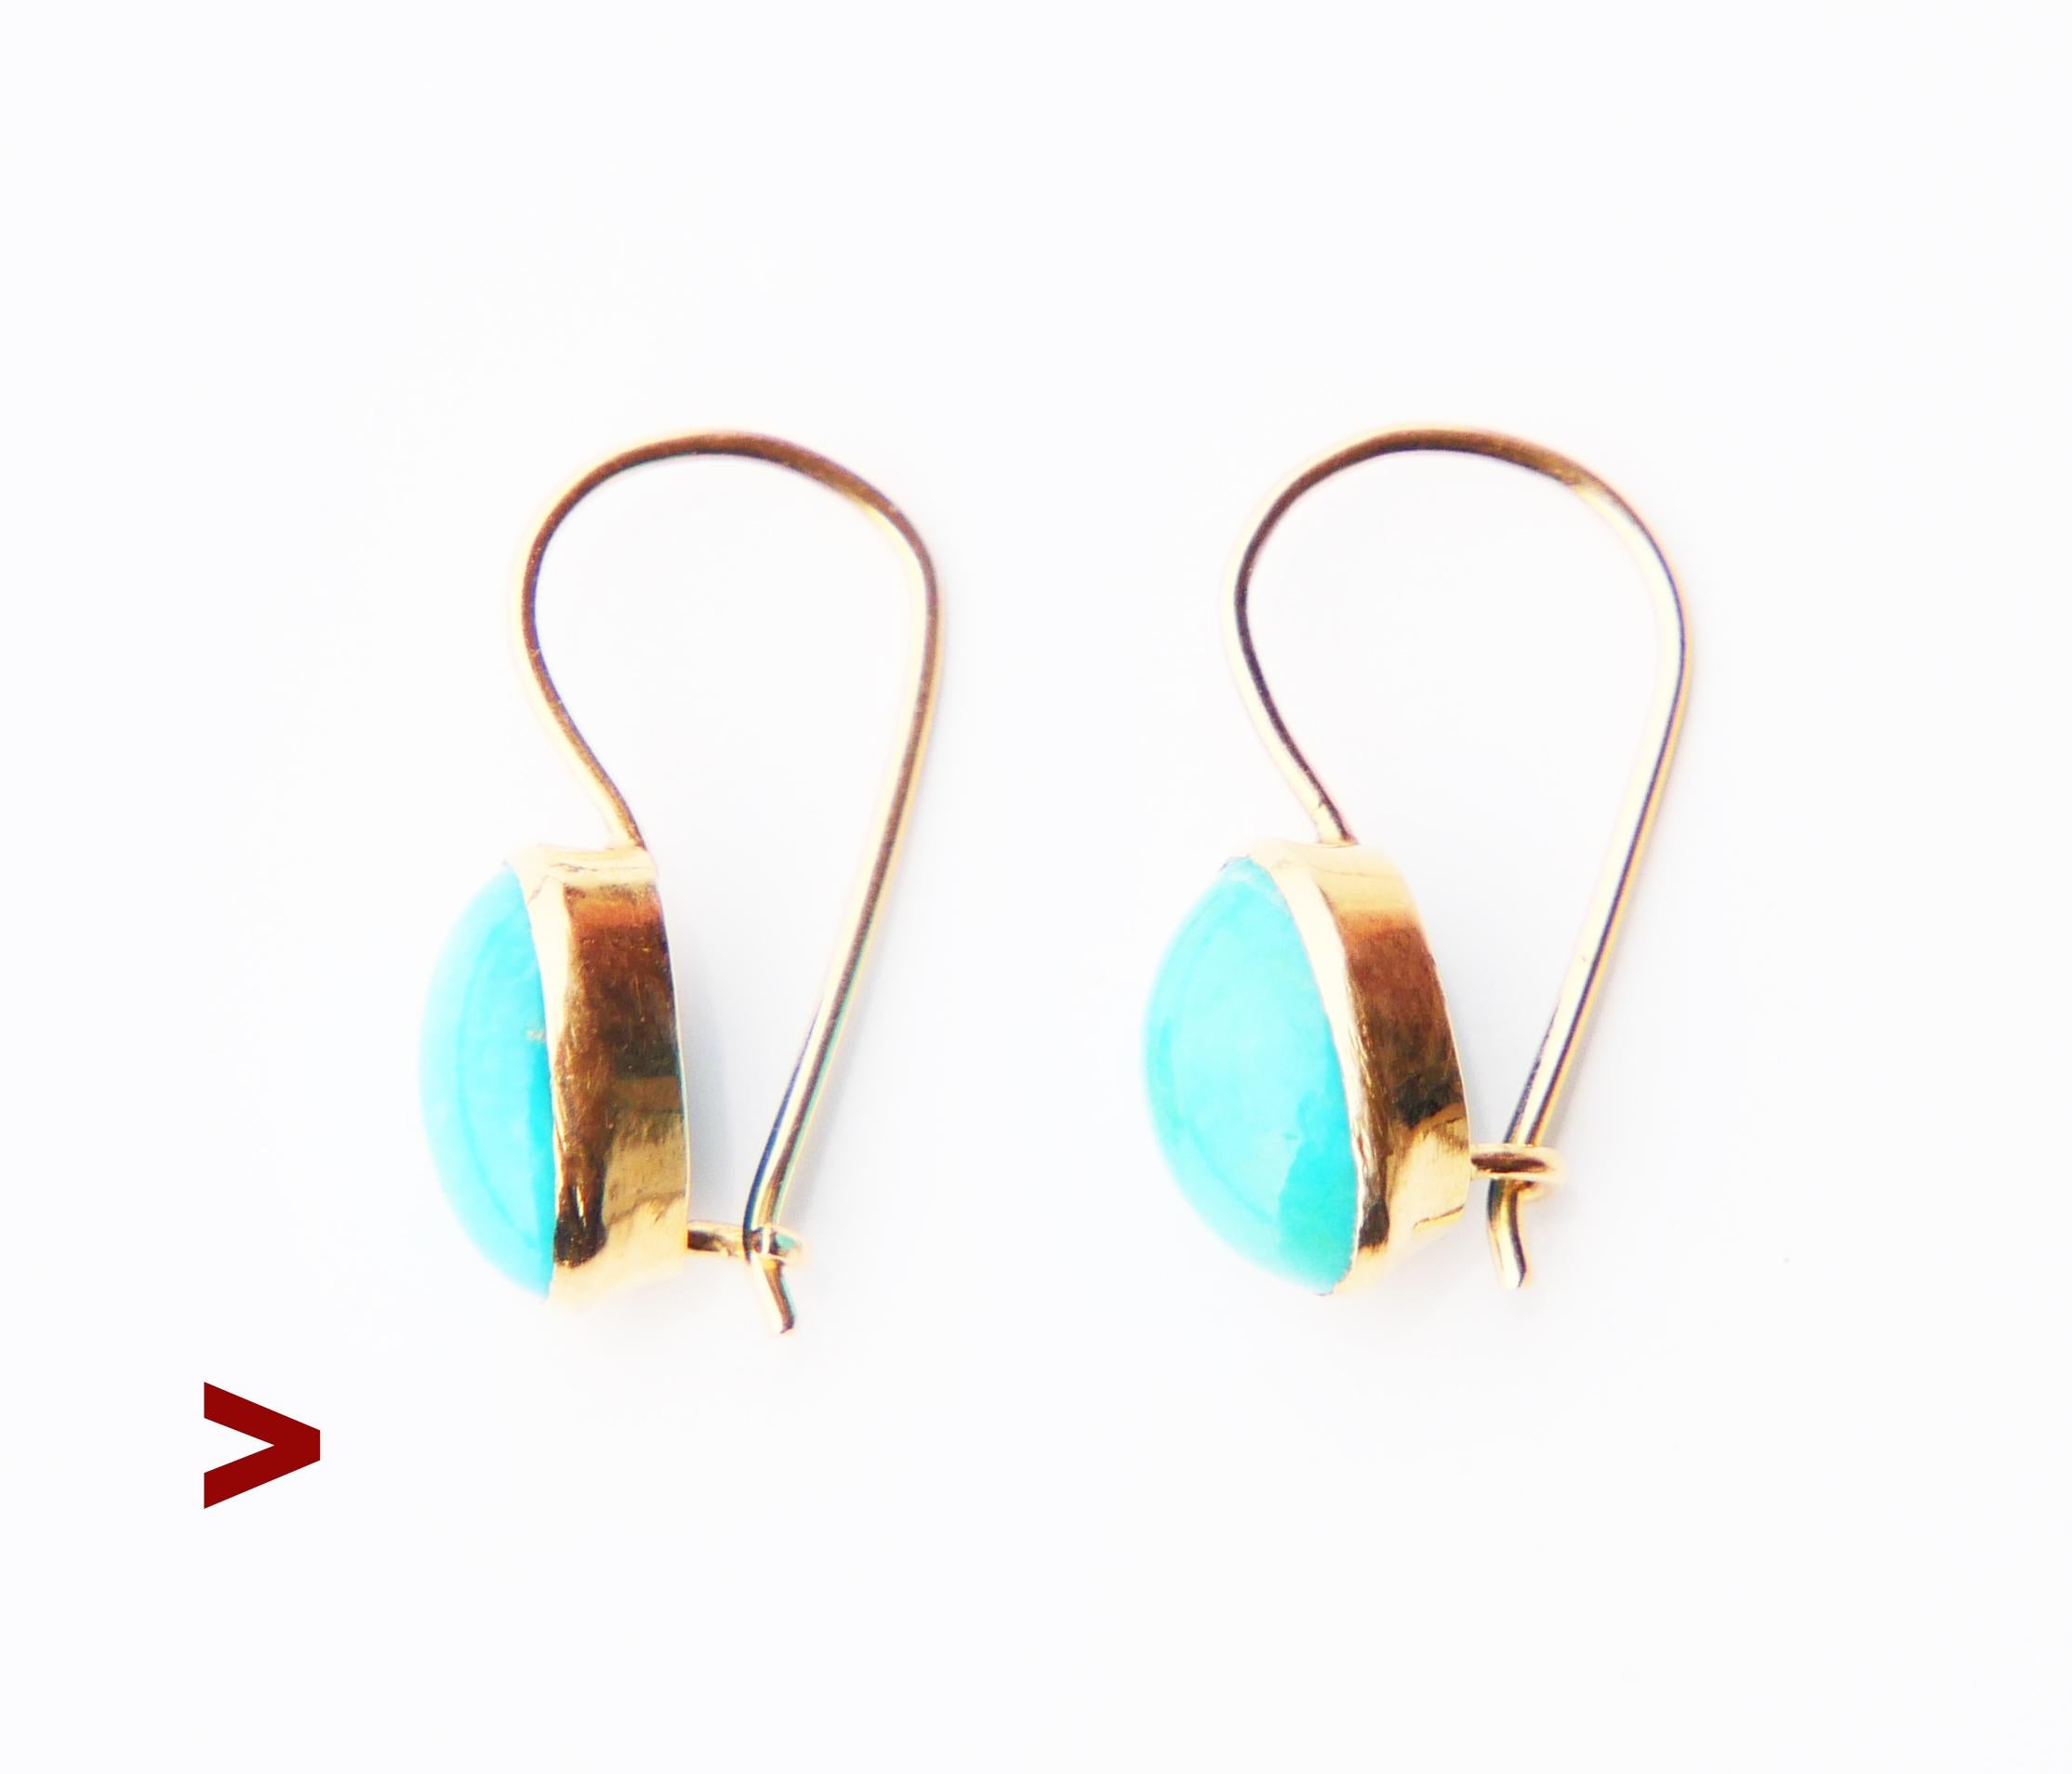 A pair of dangles in 18K Gold with cabochon cut natural Turquoise settings. The color of the stones is light Blue with a faint tint of Green. Each stone measures 9.5mm x 6mm x 4mm deep /ca 2ct. each.

There are no hallmarks on this pair. Metal